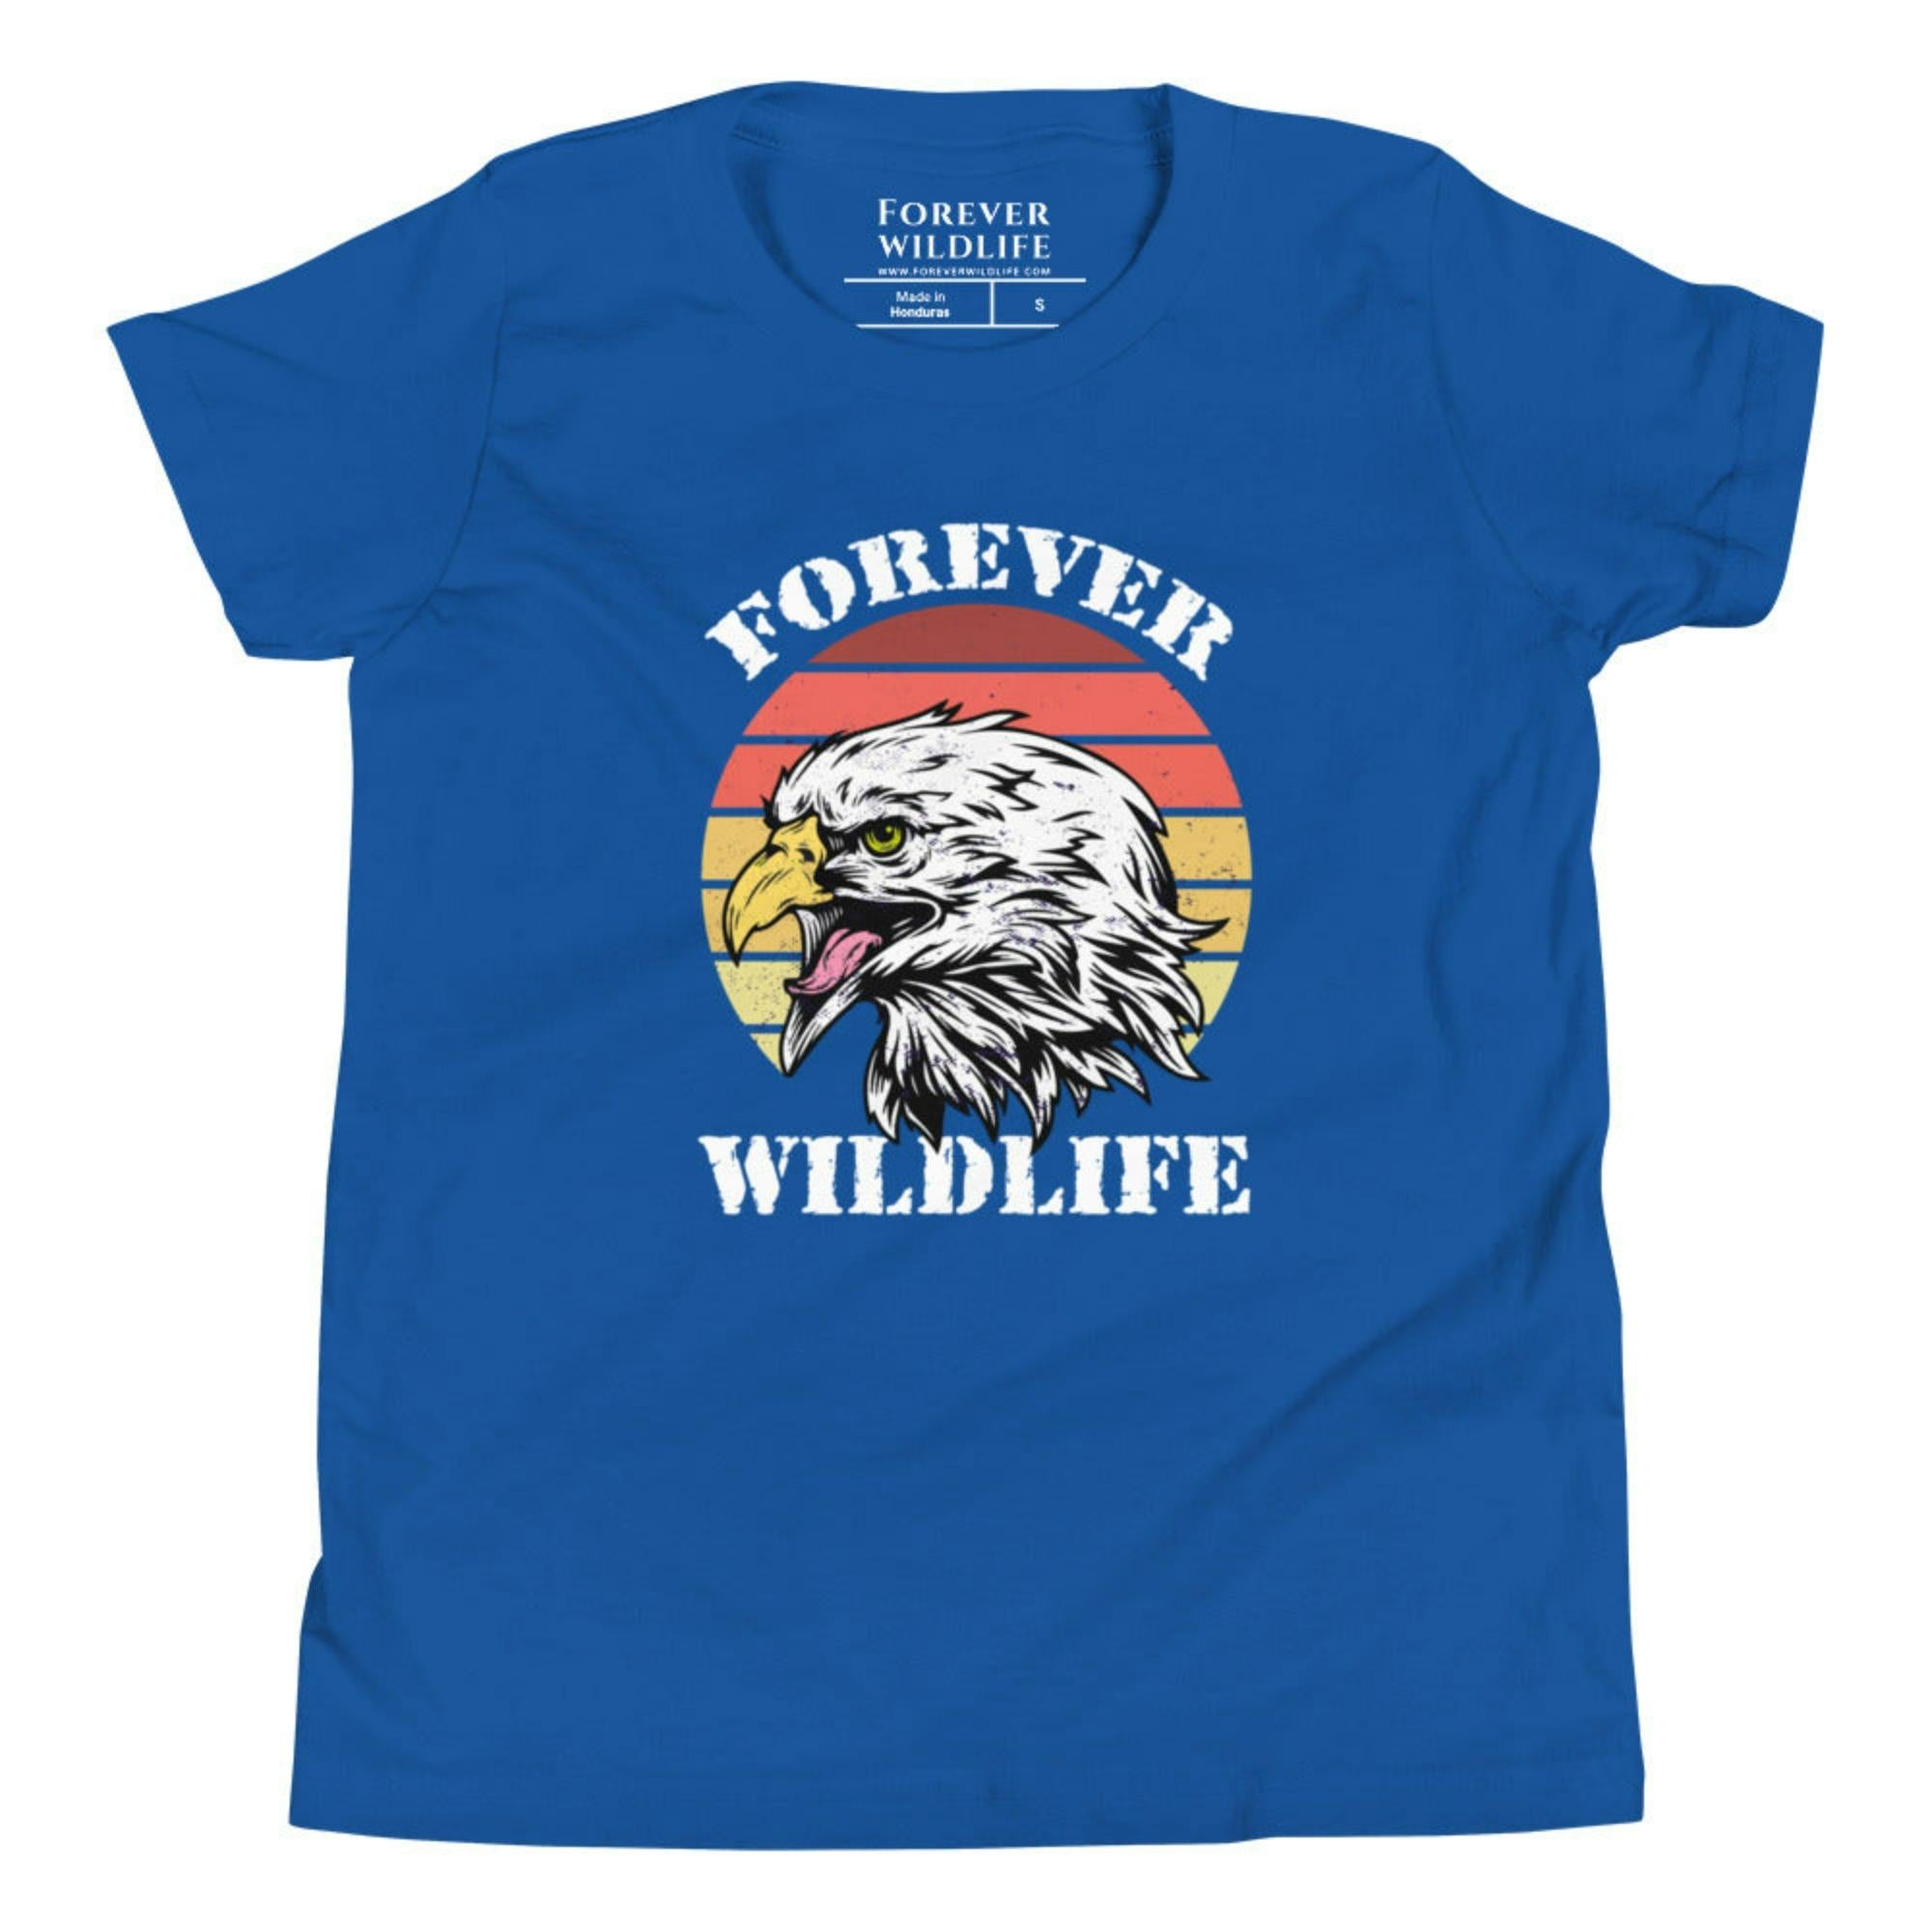 Royal Blue Youth T-Shirt with Eagle graphic as part of Wildlife T Shirts, Wildlife Clothing & Apparel by Forever Wildlife